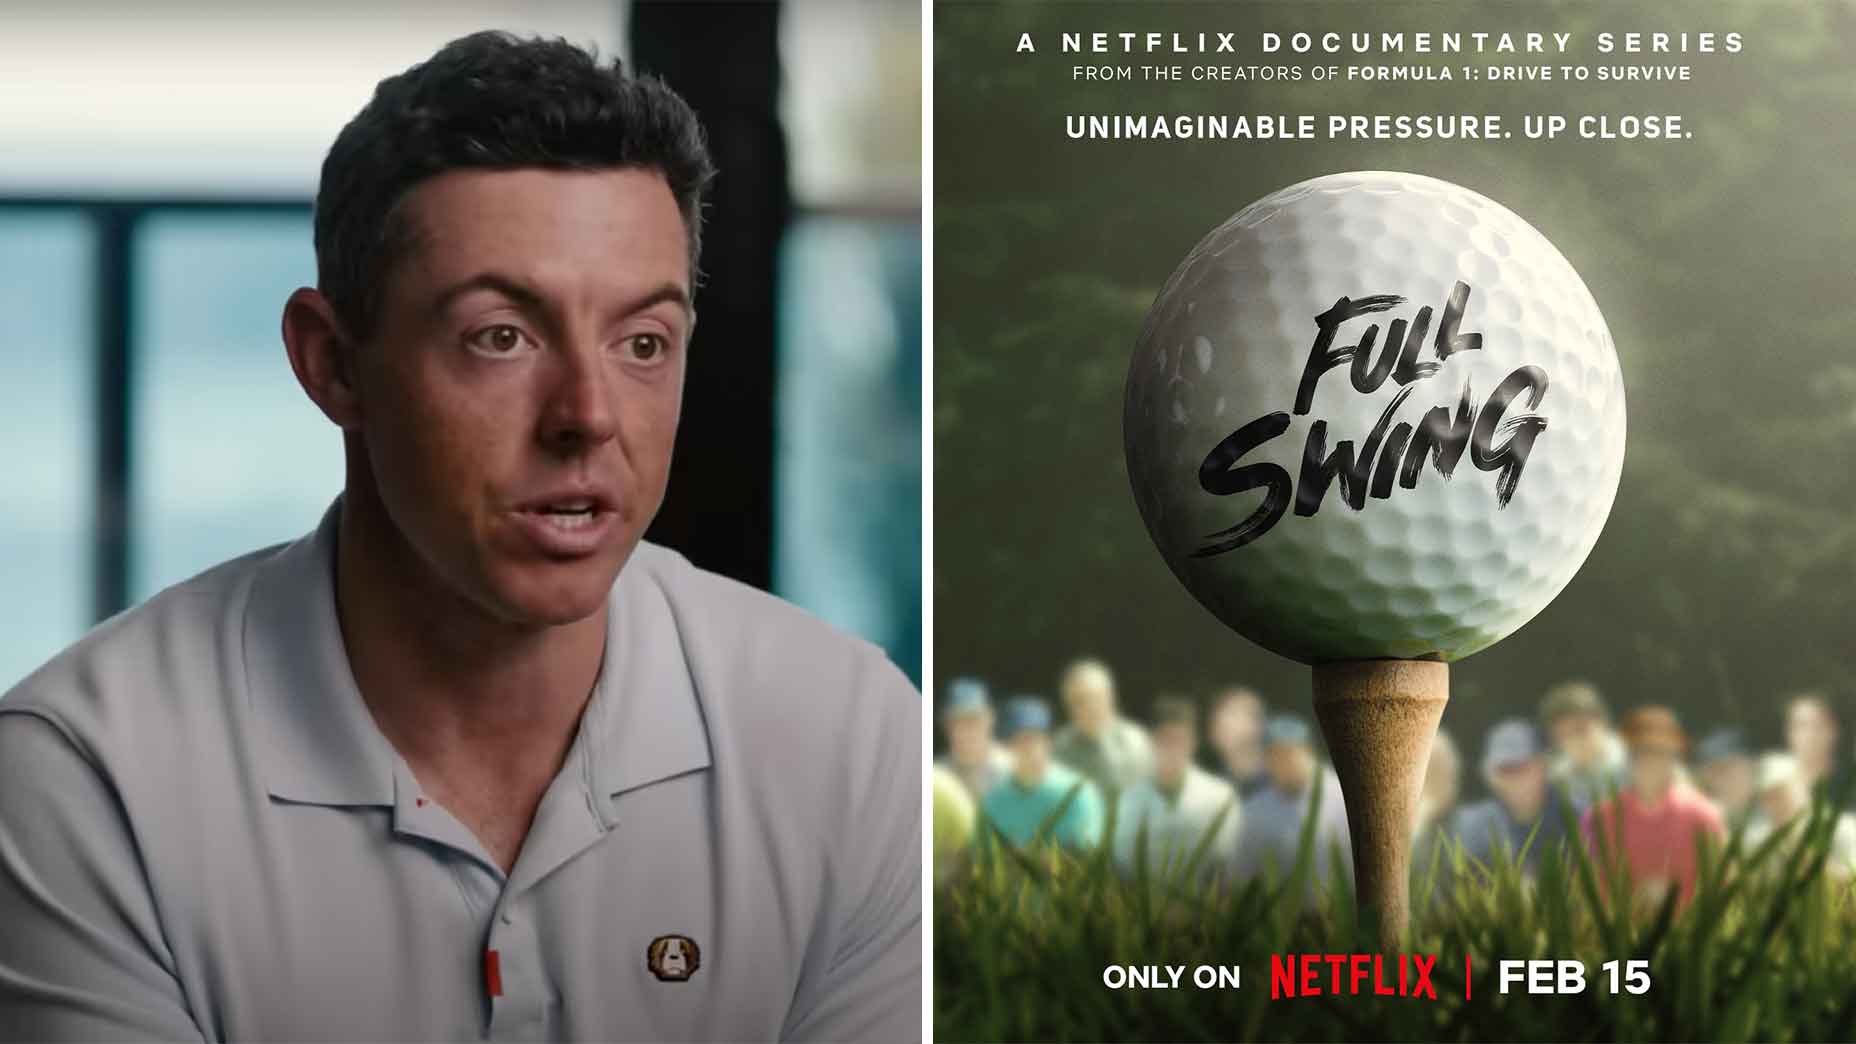 The new Netflix Full Swing series is now out